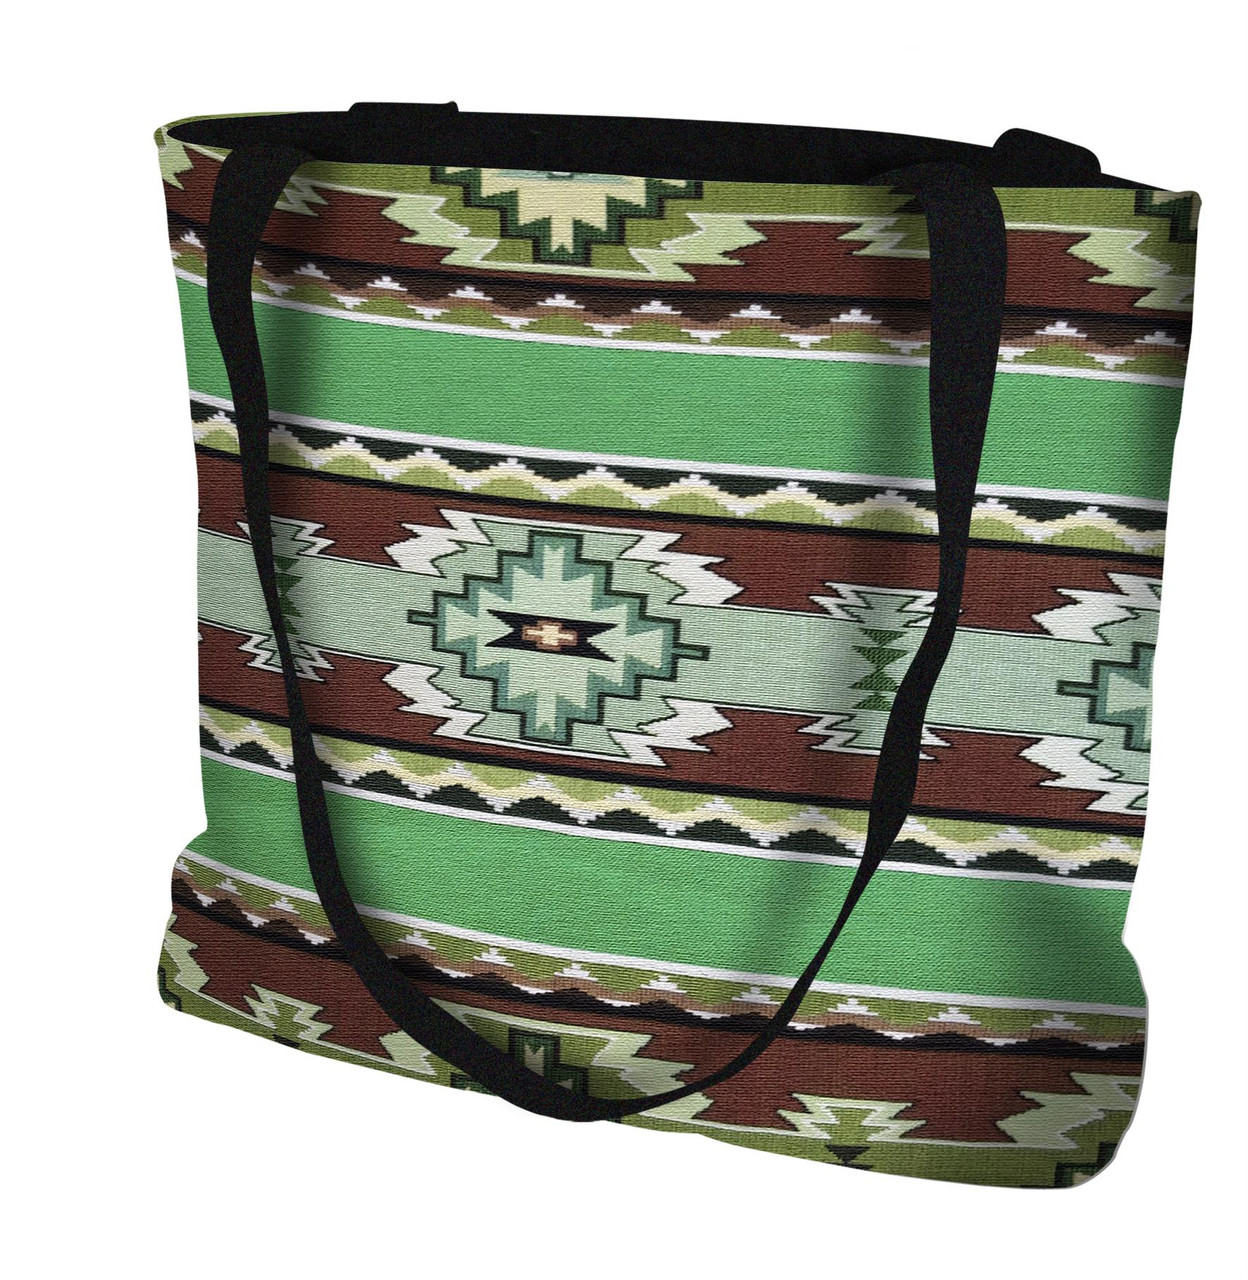 large woven tote bag